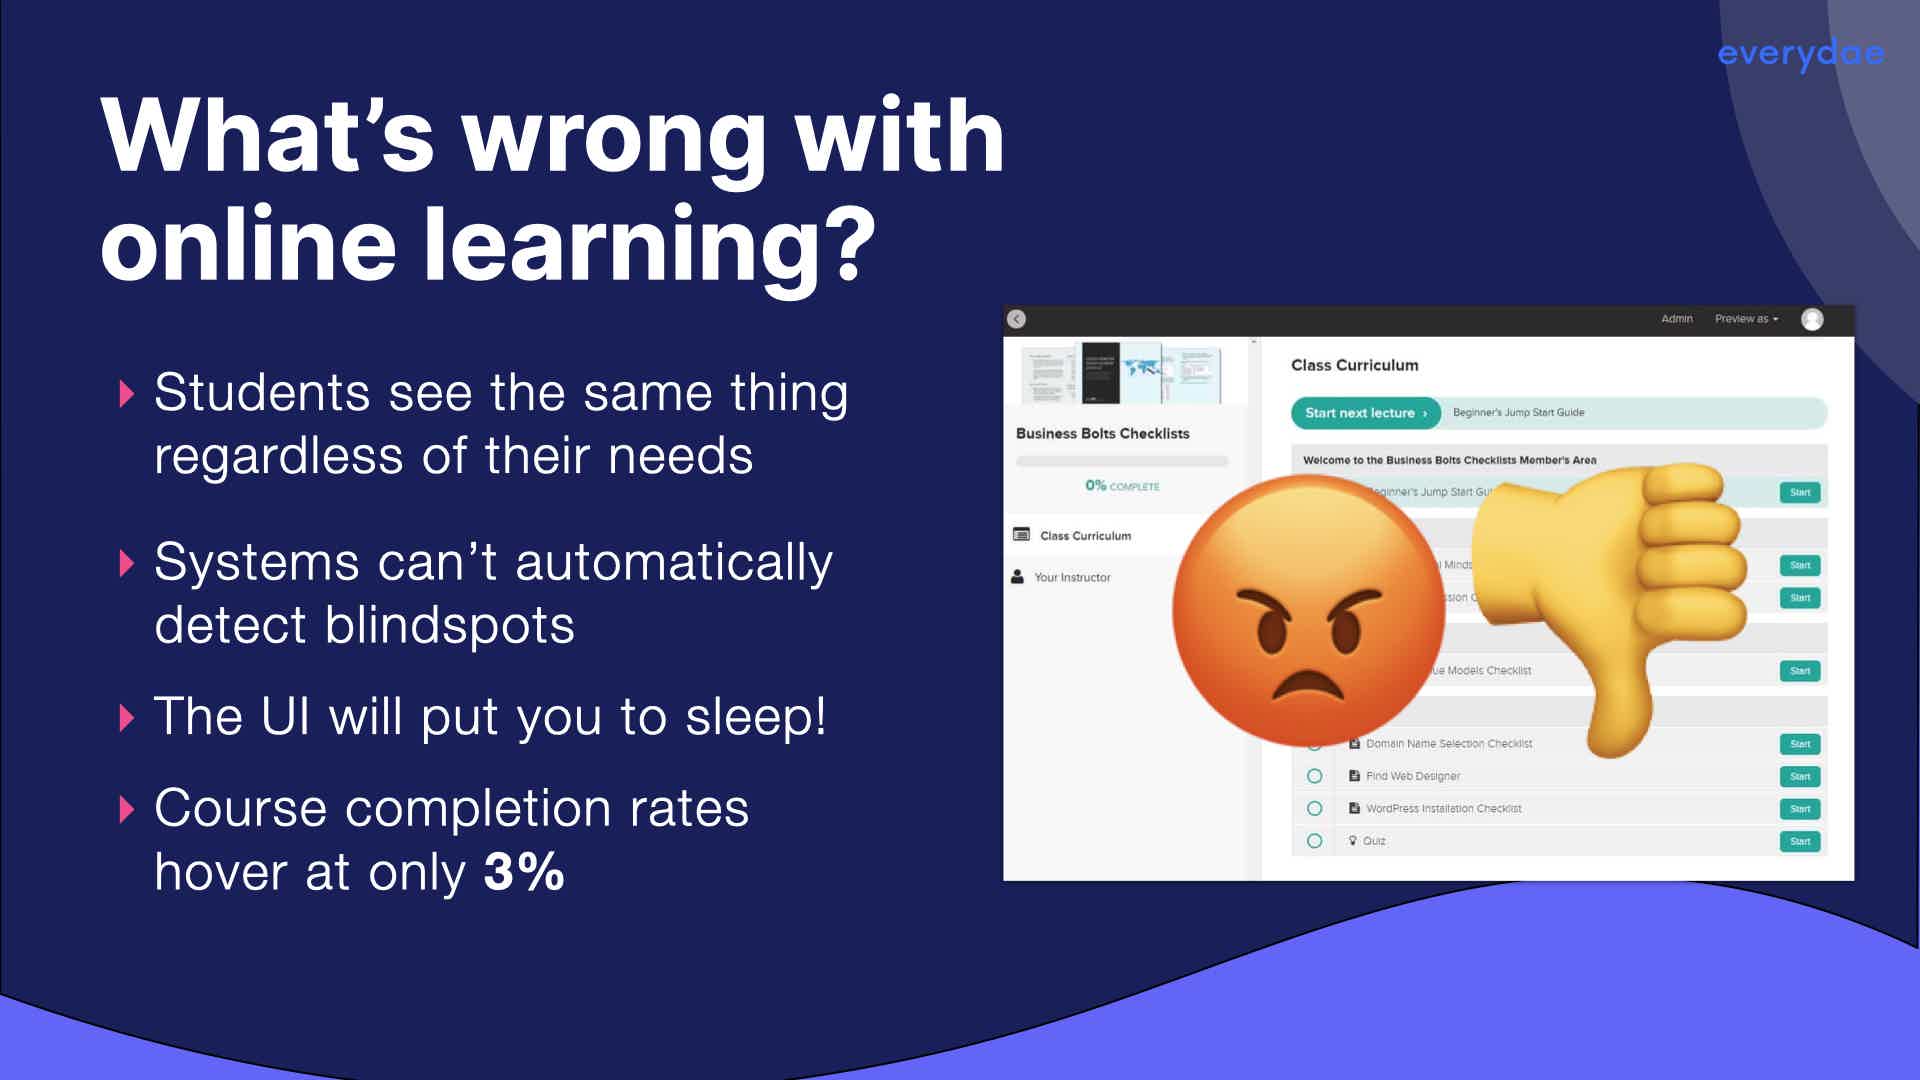 Slide showing why online learning is broken - students see the same thing regardless of their needs, systems can't automatically detect blindspots, the UI will put you to sleep, 3% course completion rates etc.